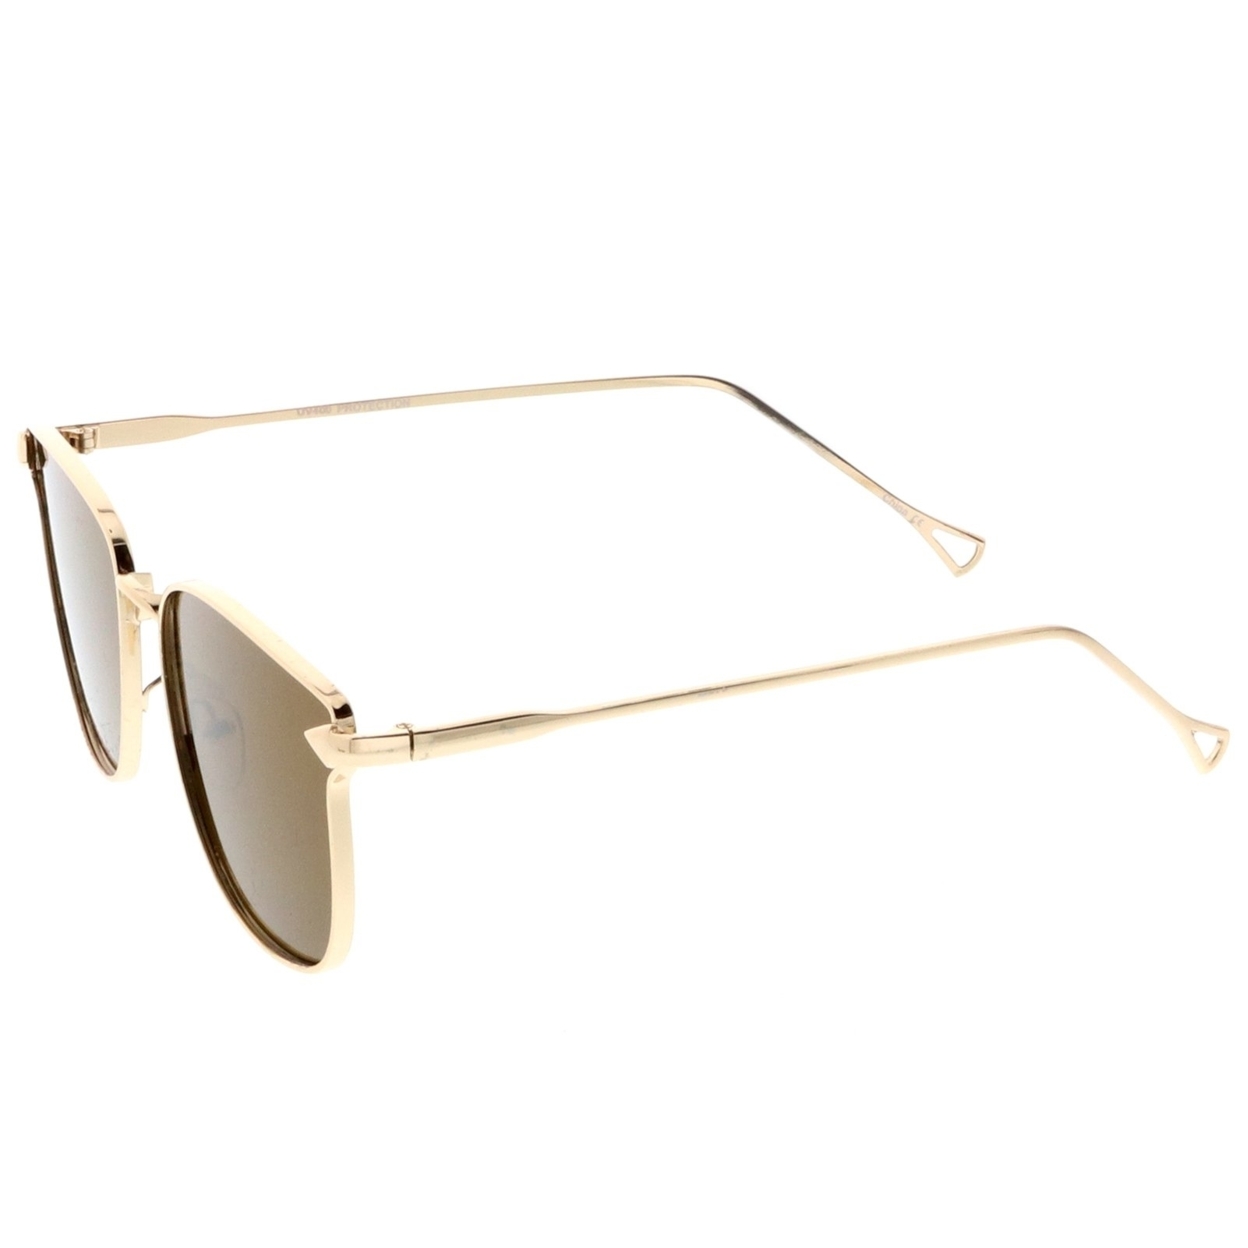 Modern Metal Square Sunglasses With Flat Lenses And Slim Hook Arms 55mm - Gold / Brown